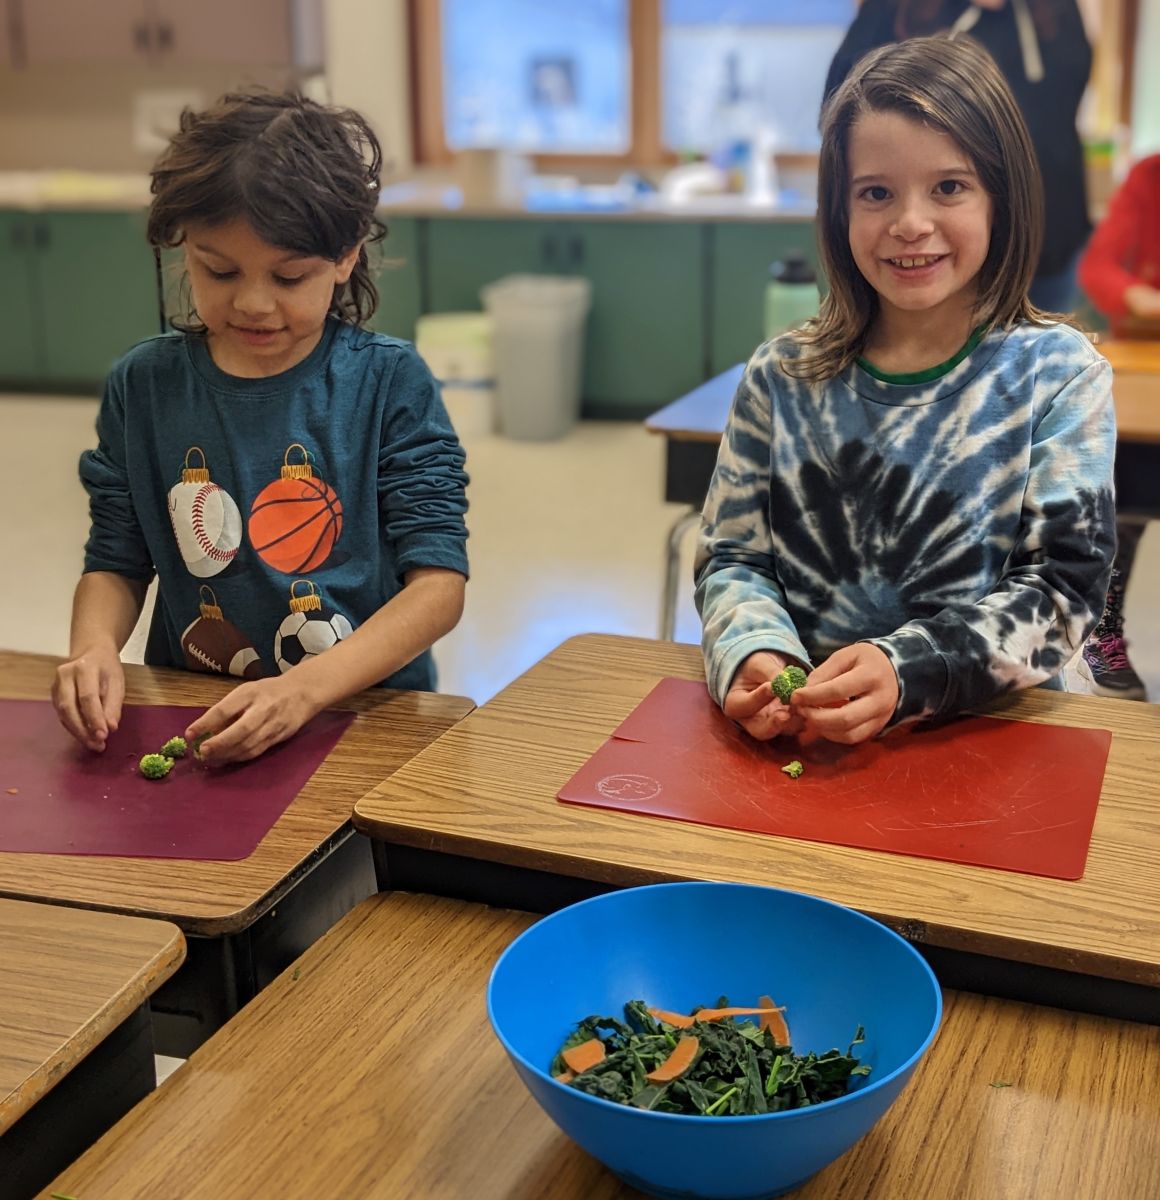 Two students help make salads during cooking classes.